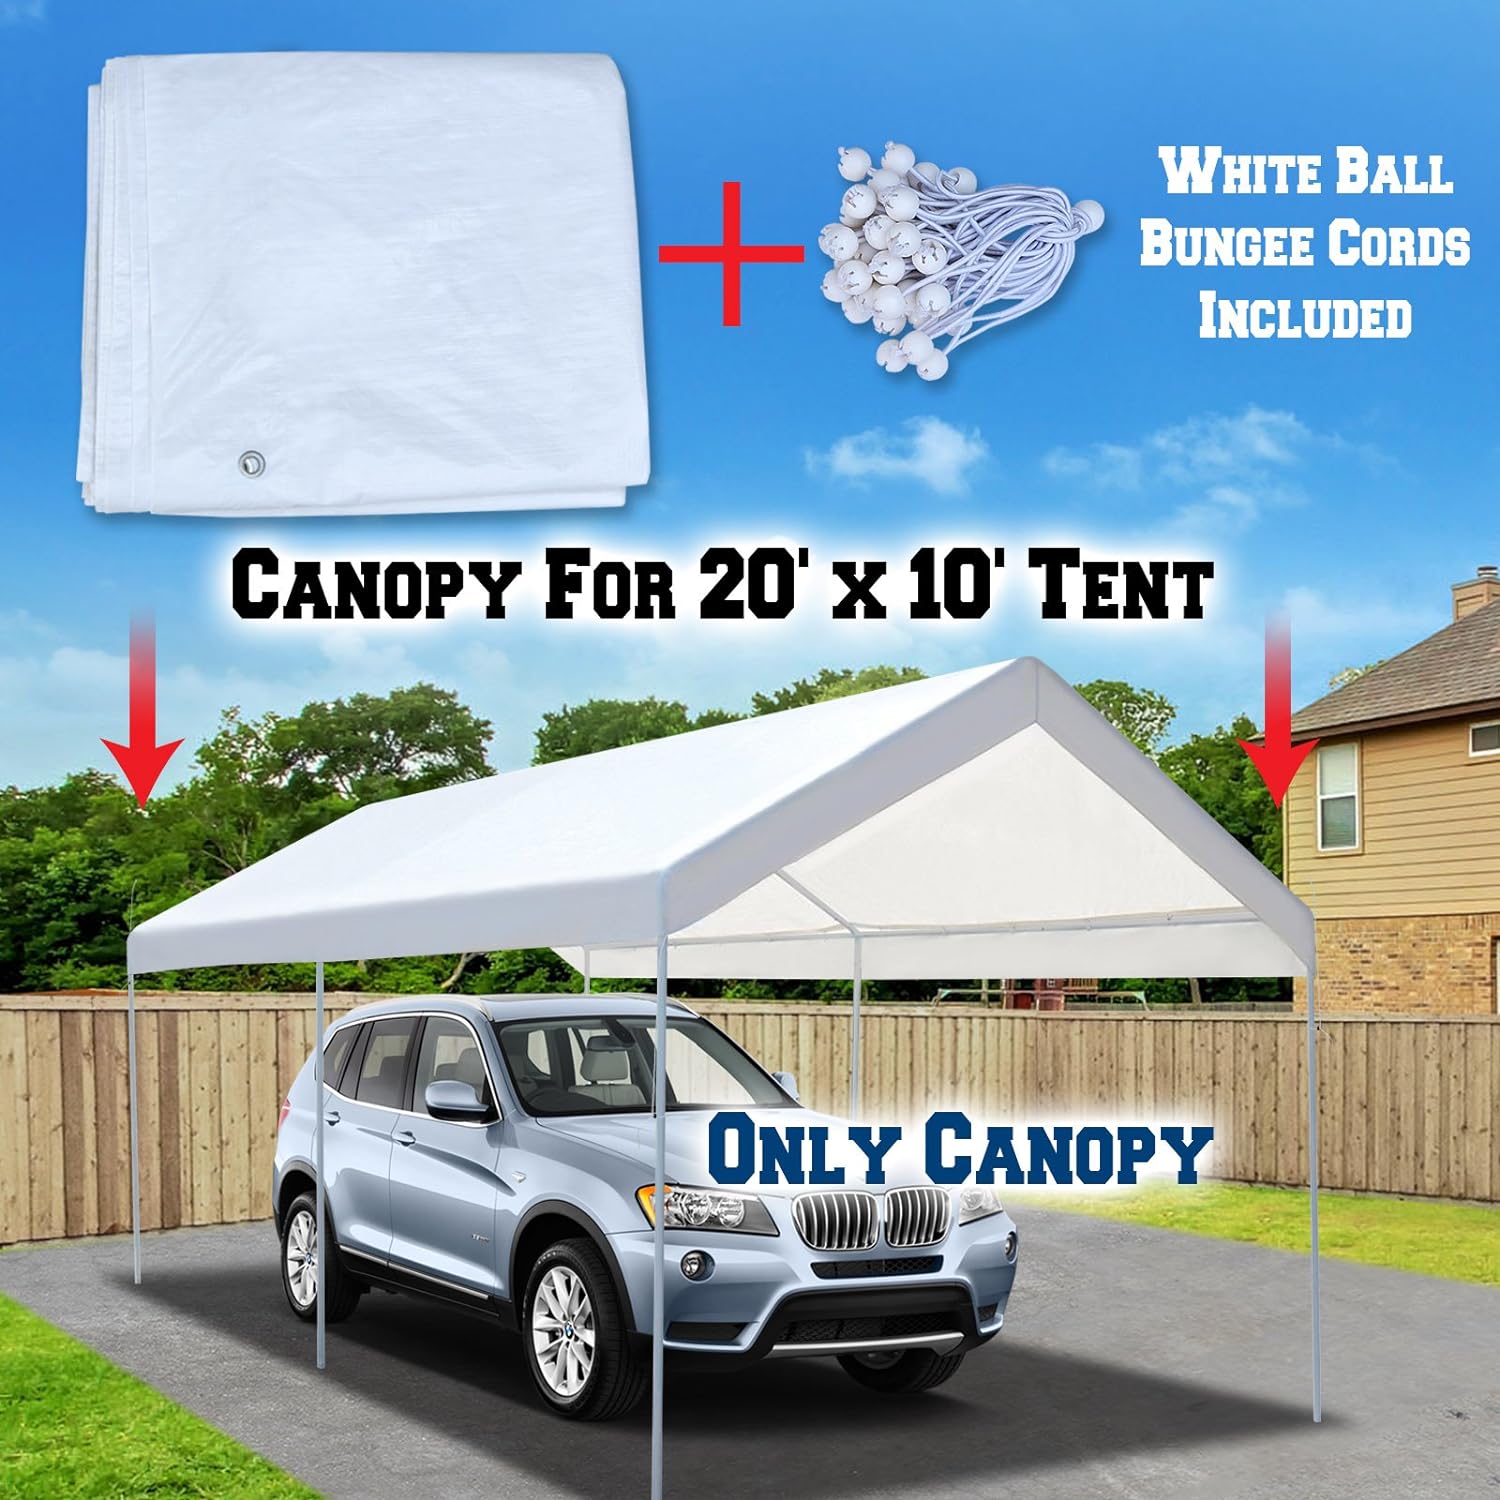 YARDGROW 10'x20' Carport Replacement Canopy Cover for Tent Top Garage Shelter Cover with Ball Bungees (Only Cover, Frame is not Included